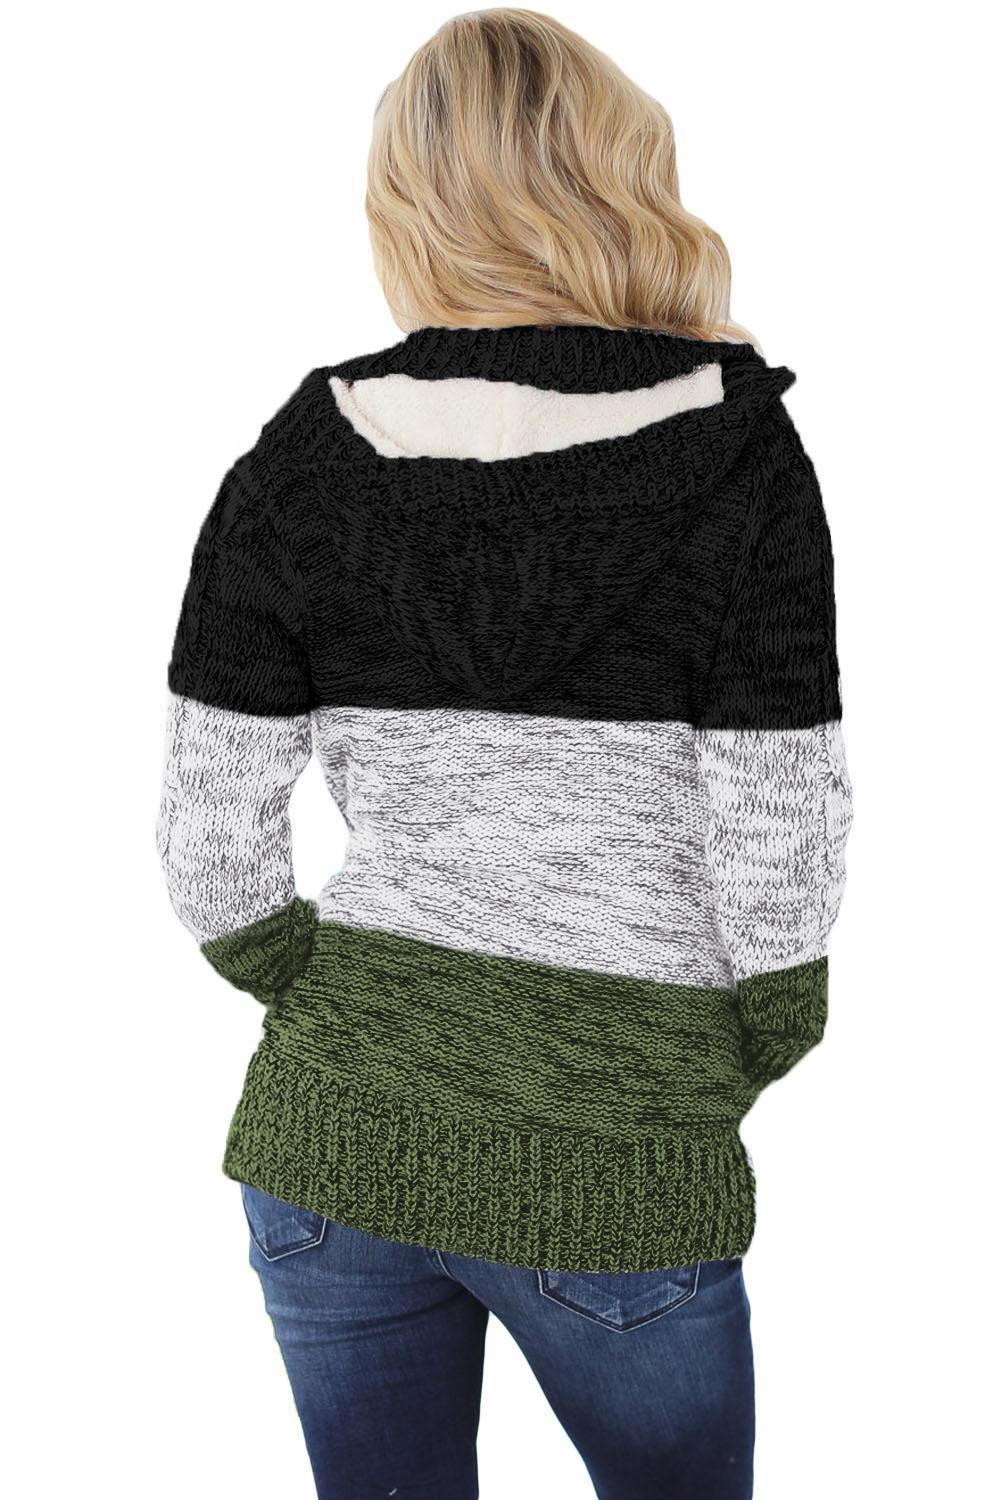 Hooded Button Cable Knit Cardigan - L & M Kee, LLC